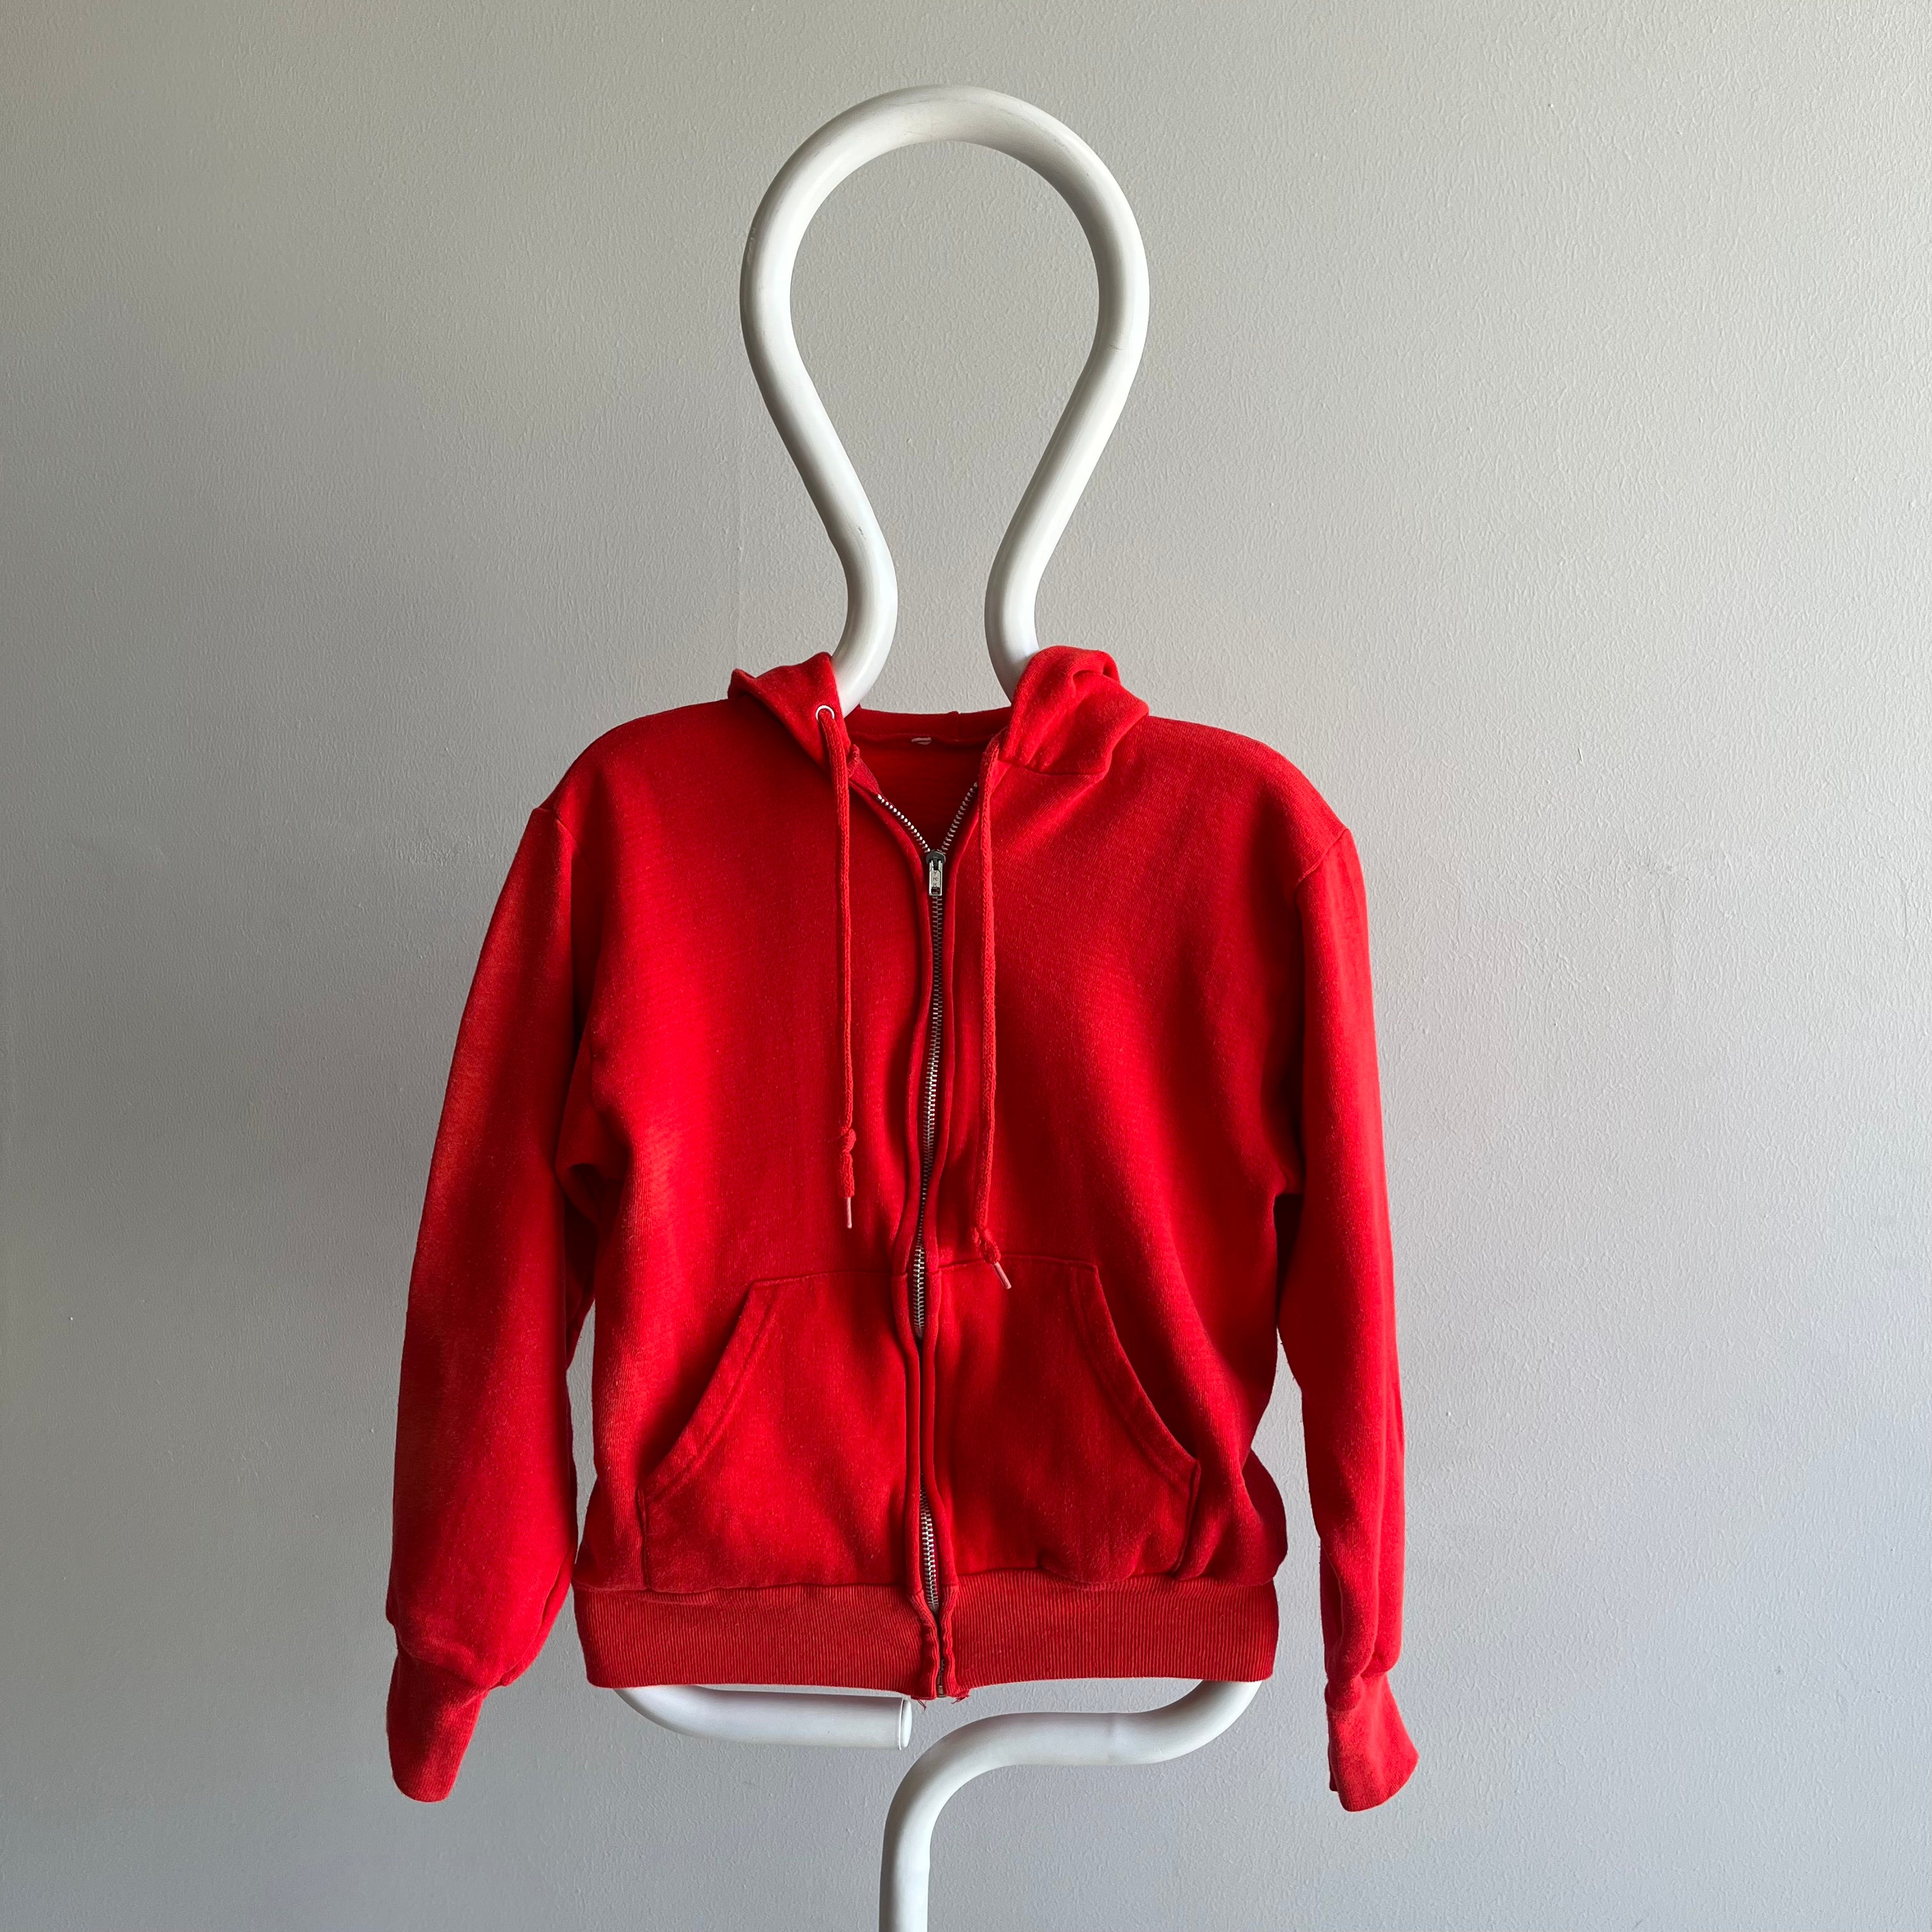 1980s Epically Sun Faded Smaller Red/Orange Hoodie